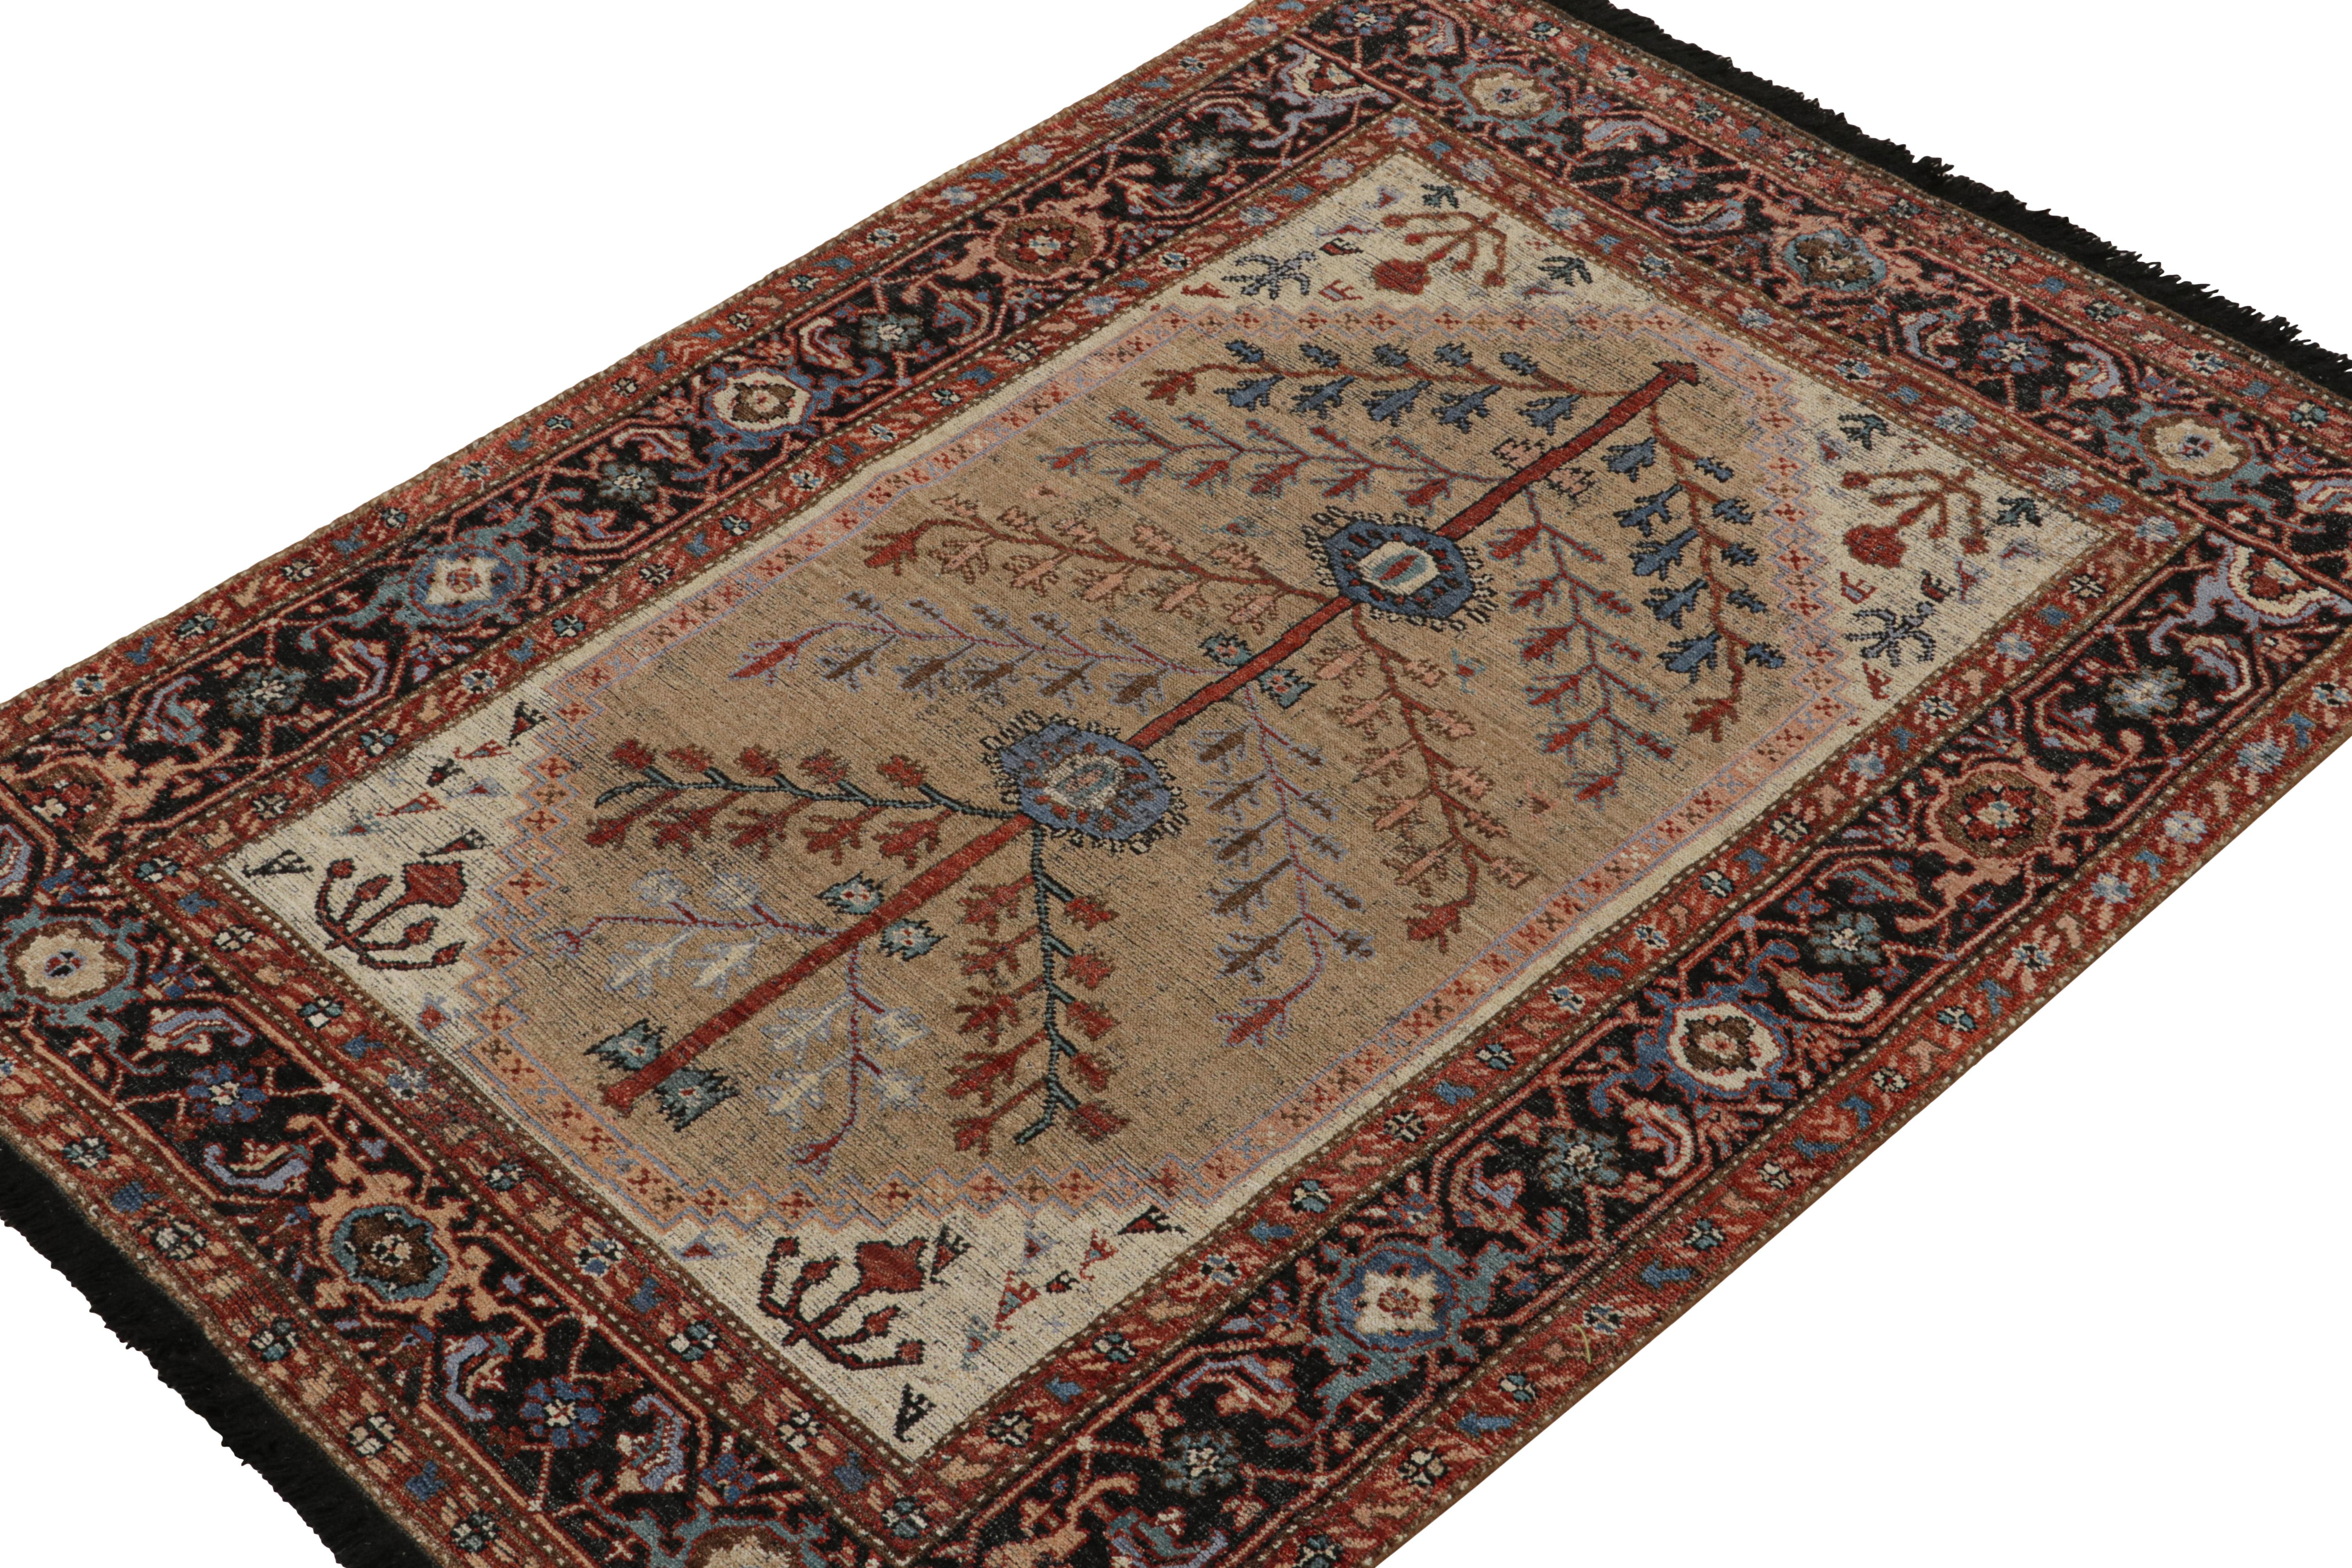 This 5x7 rug is a grand new entry to Rug & Kilim’s custom classics Burano collection. Hand-knotted in wool.

On the design

This rug is inspired by antique Persian tribal rugs & the tree of life pattern in rich colors of red, blue & brown. 

A cozy